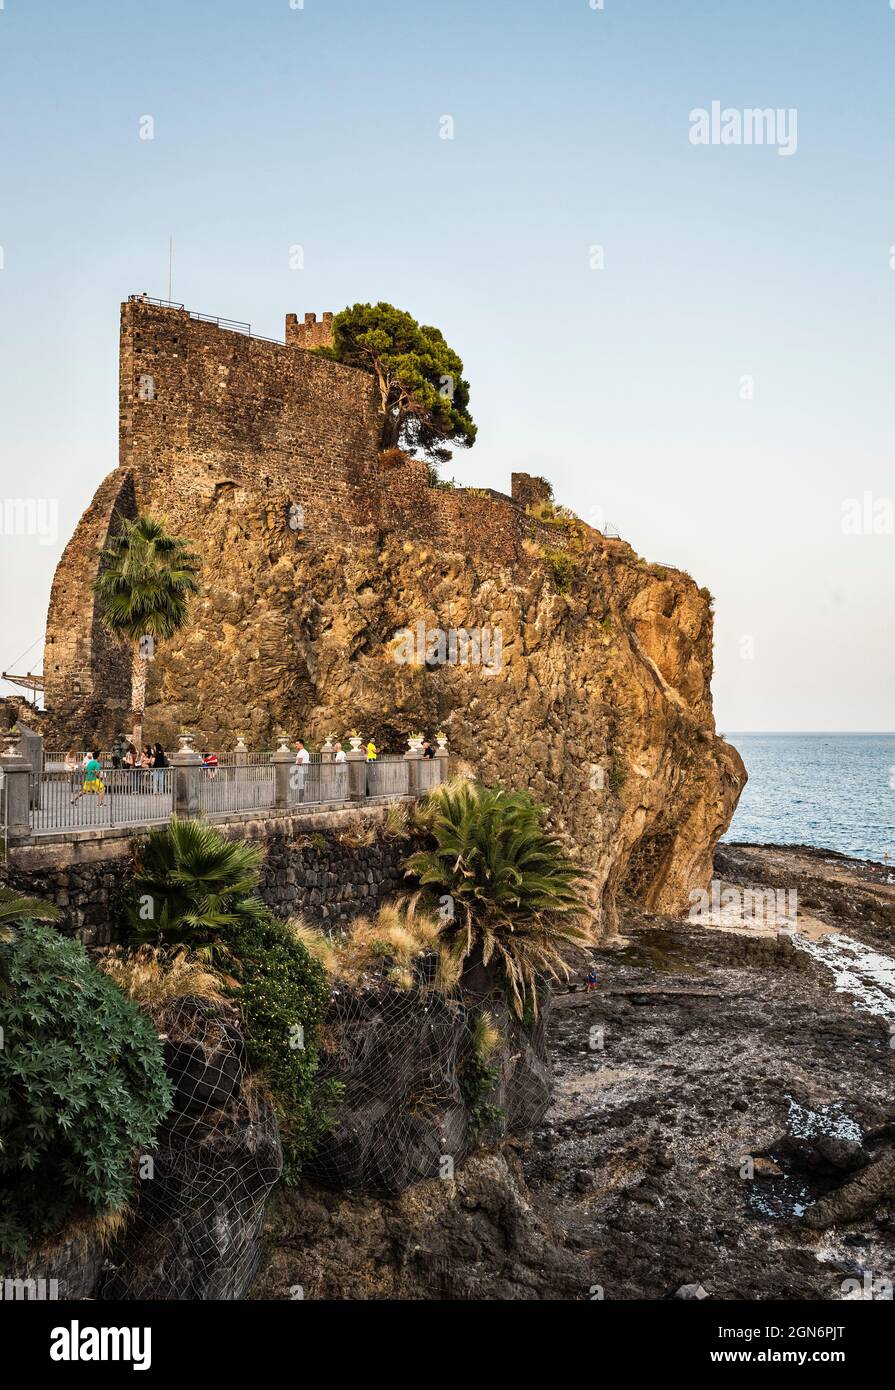 The Norman castle (1076) in Aci Castello, Catania, Sicily, Italy. It stands on a high basalt (lava) outcrop and is based on a 7c Byzantine fortress Stock Photo